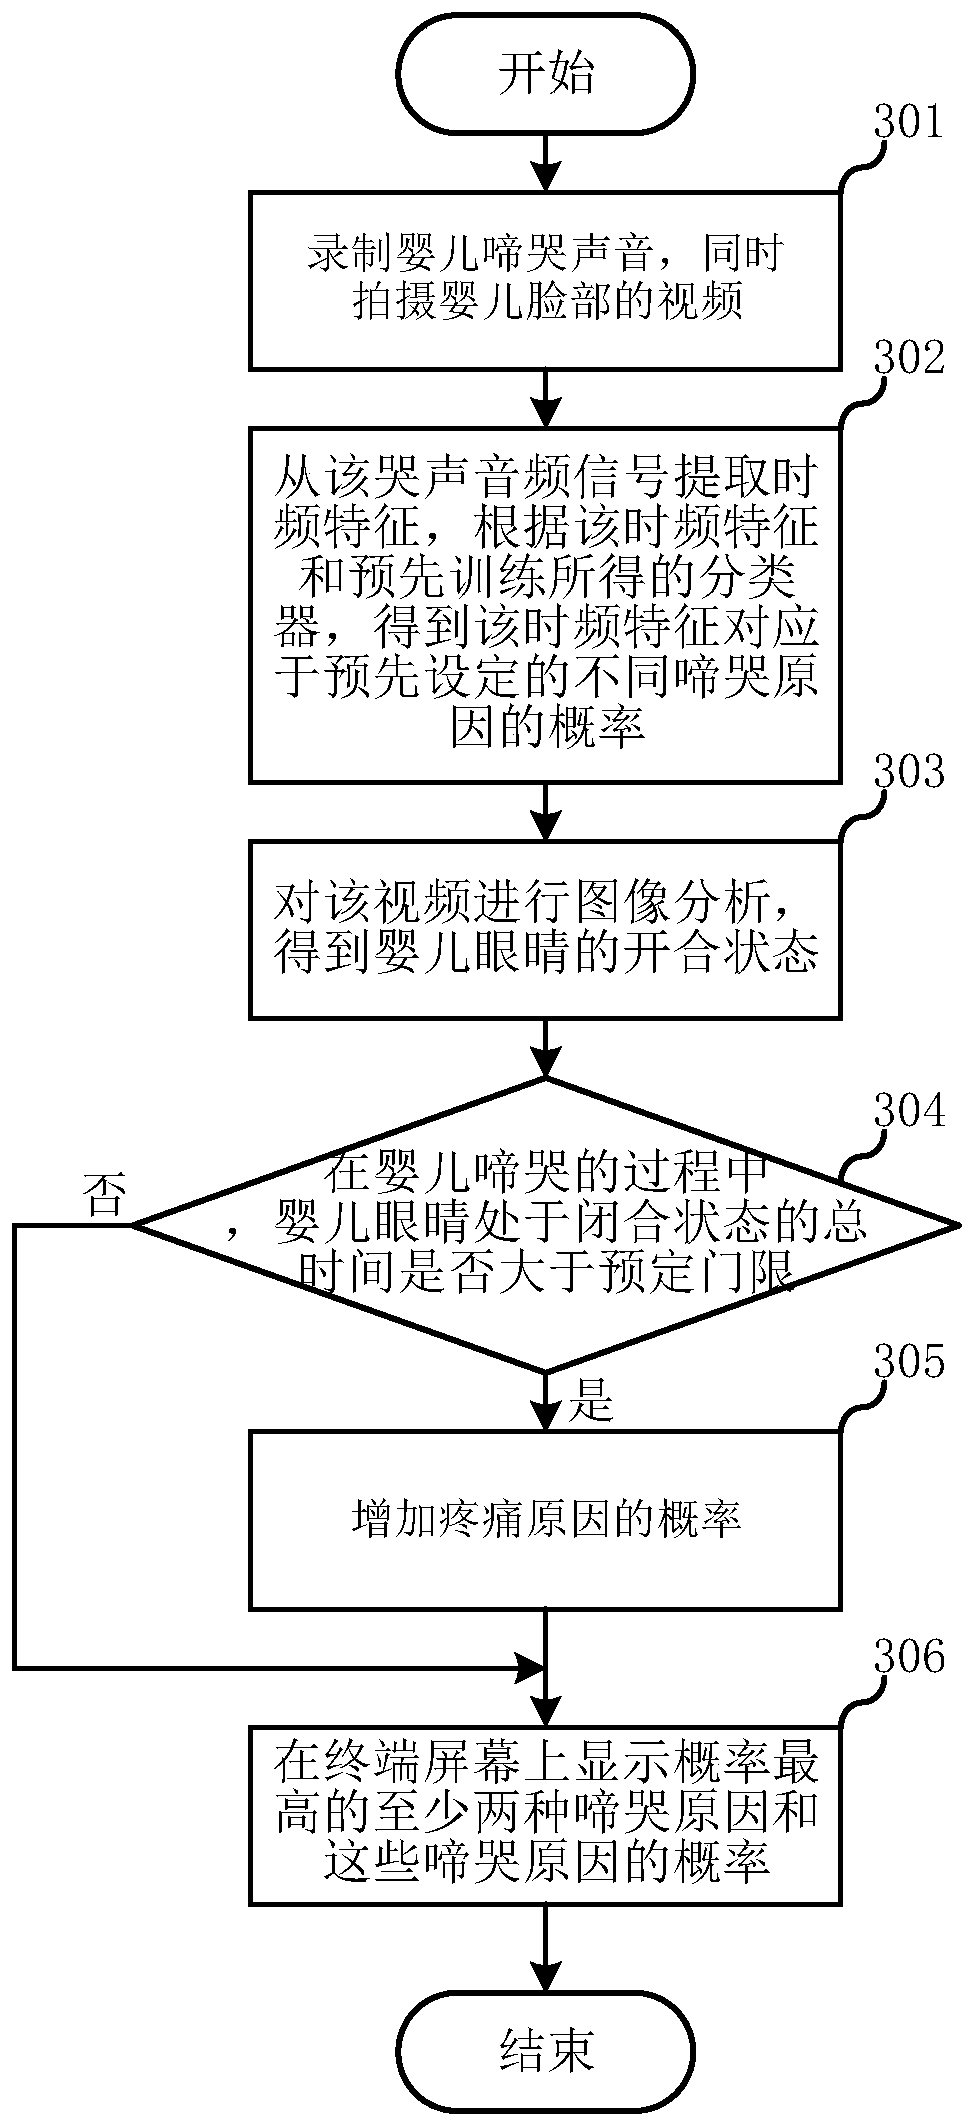 Method and system for automatic identification of reasons for infant crying